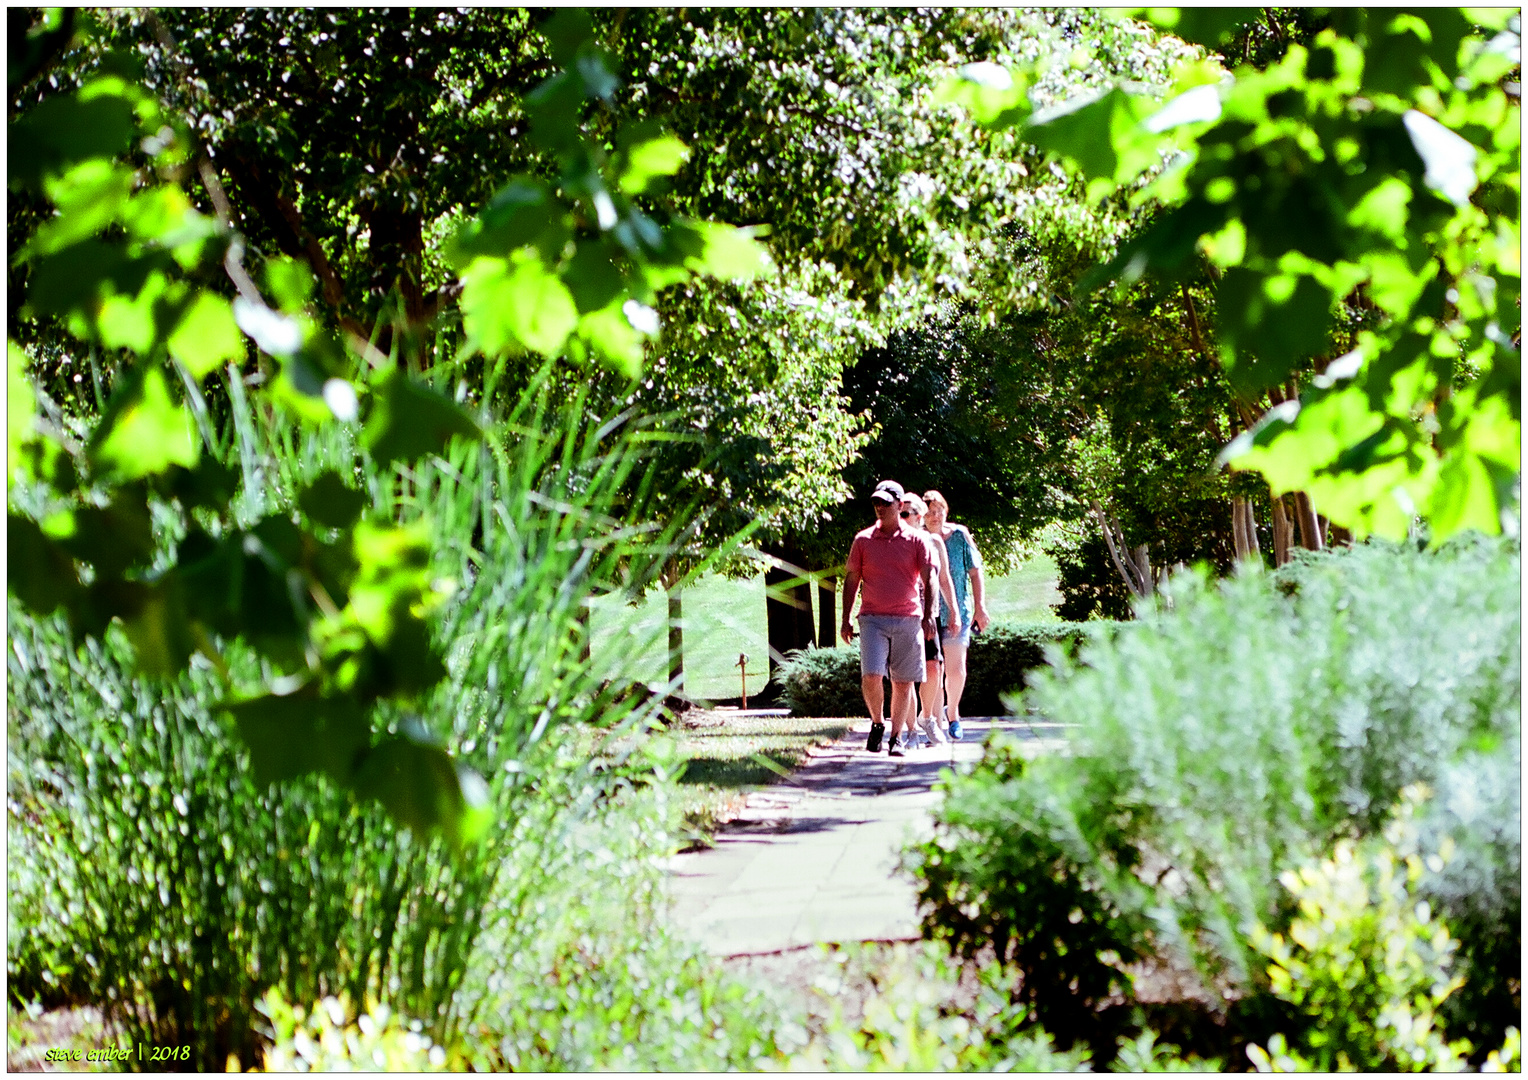 Summer at Quiet Waters - Strolling through the Park